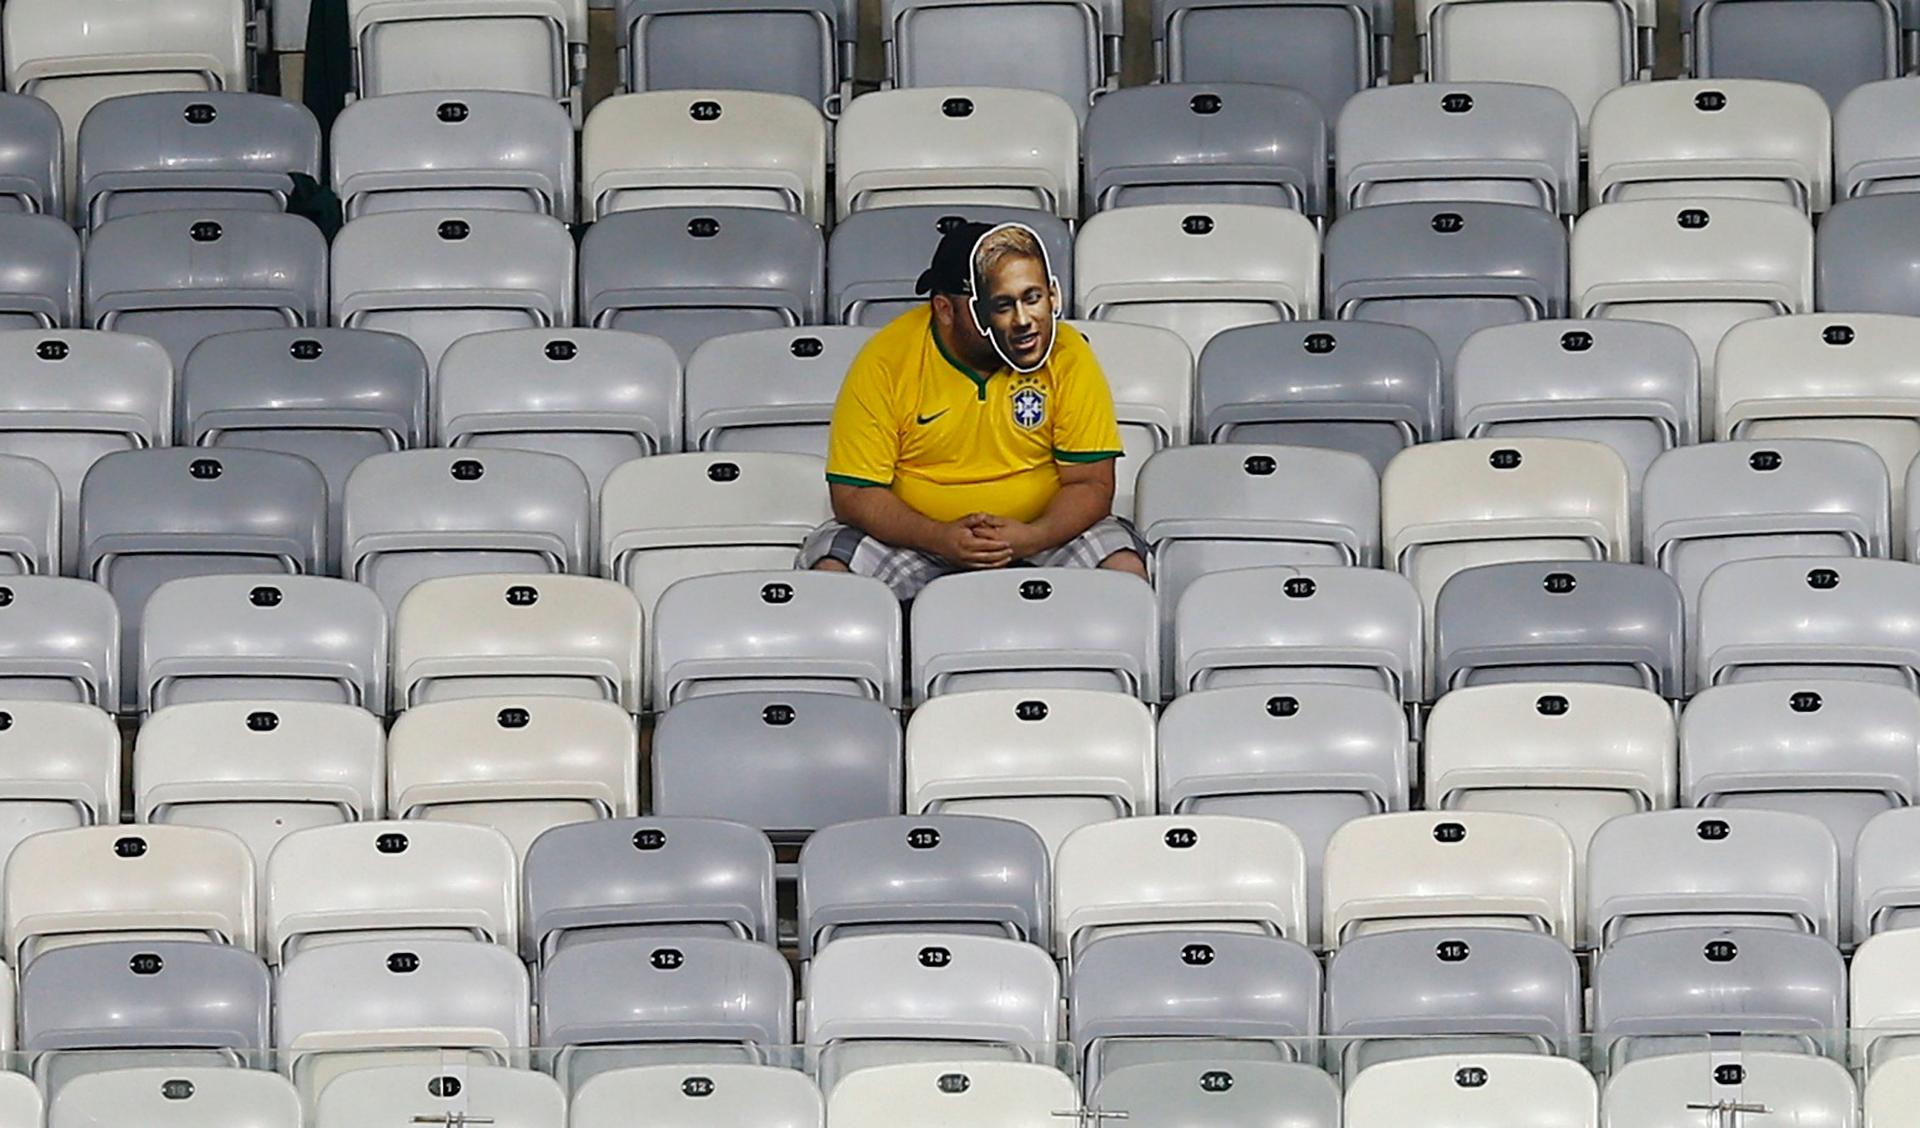 A Brazil fan sits alone in the stands at the end of the 2014 World Cup semi-finals against Germany. Fans were in a state of stunned disbelief at the most amazing World Cup result of all time.